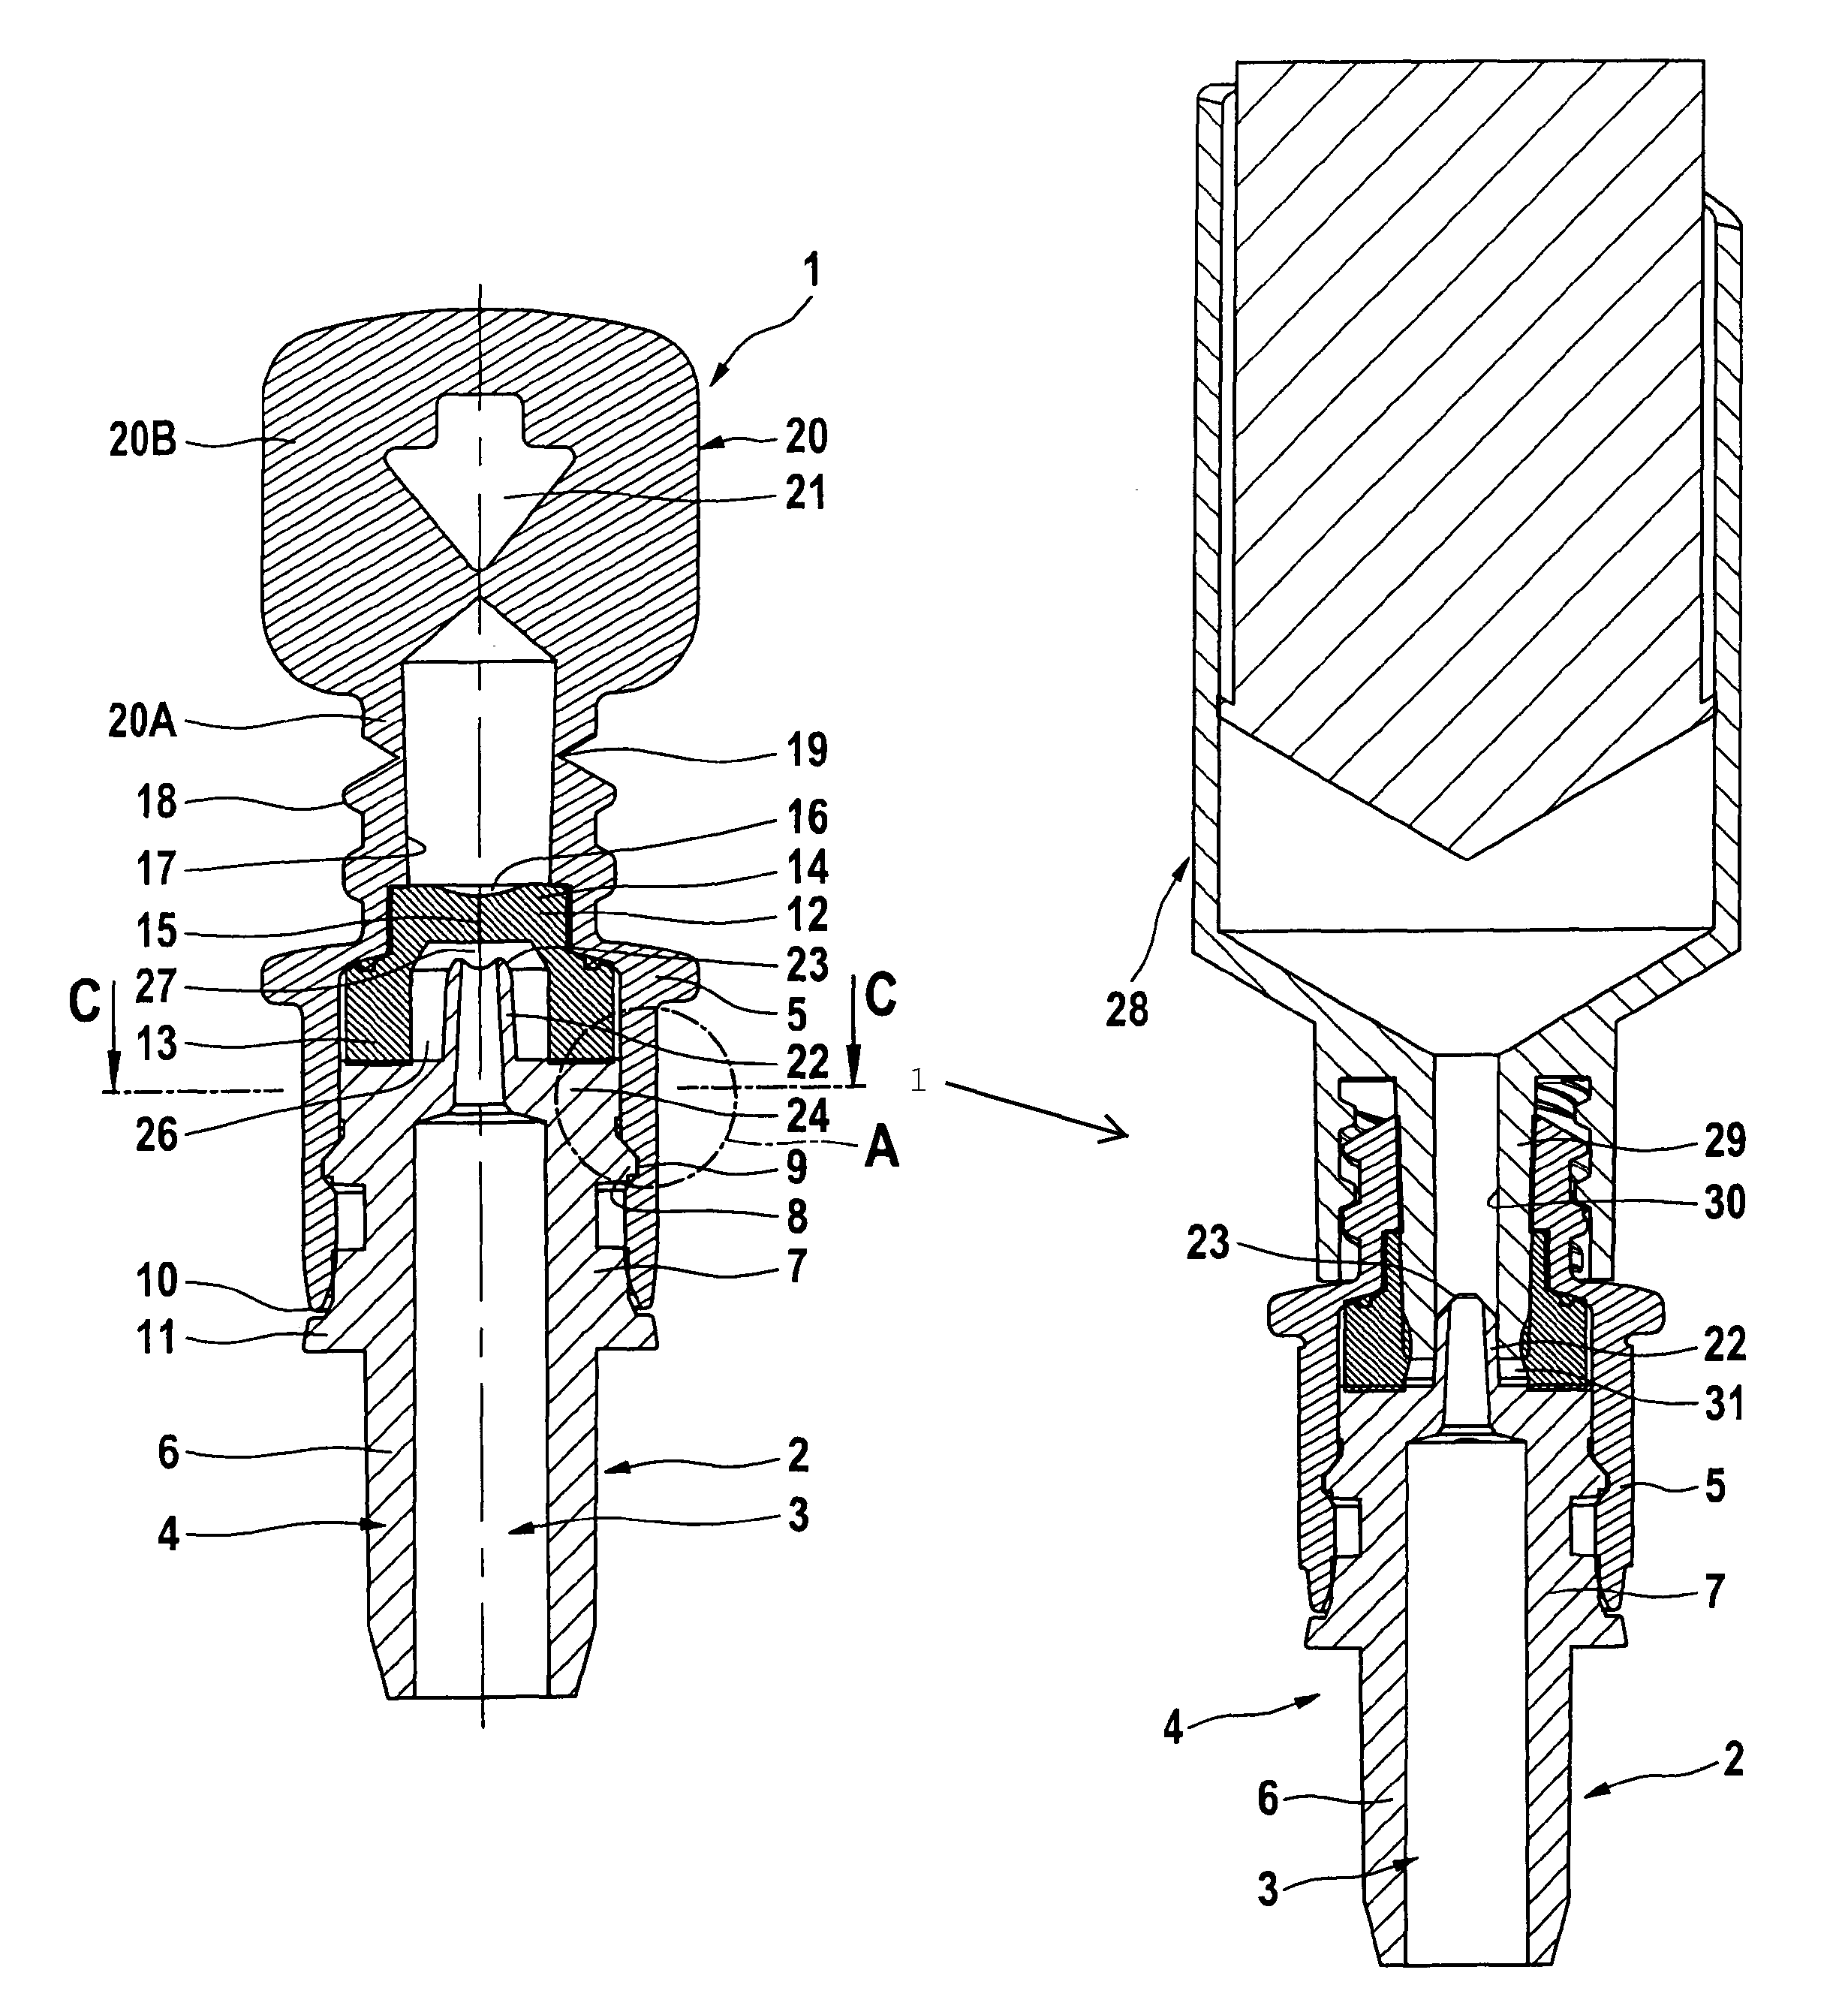 Connector having a membrane, for connecting a syringe to a container or tubing